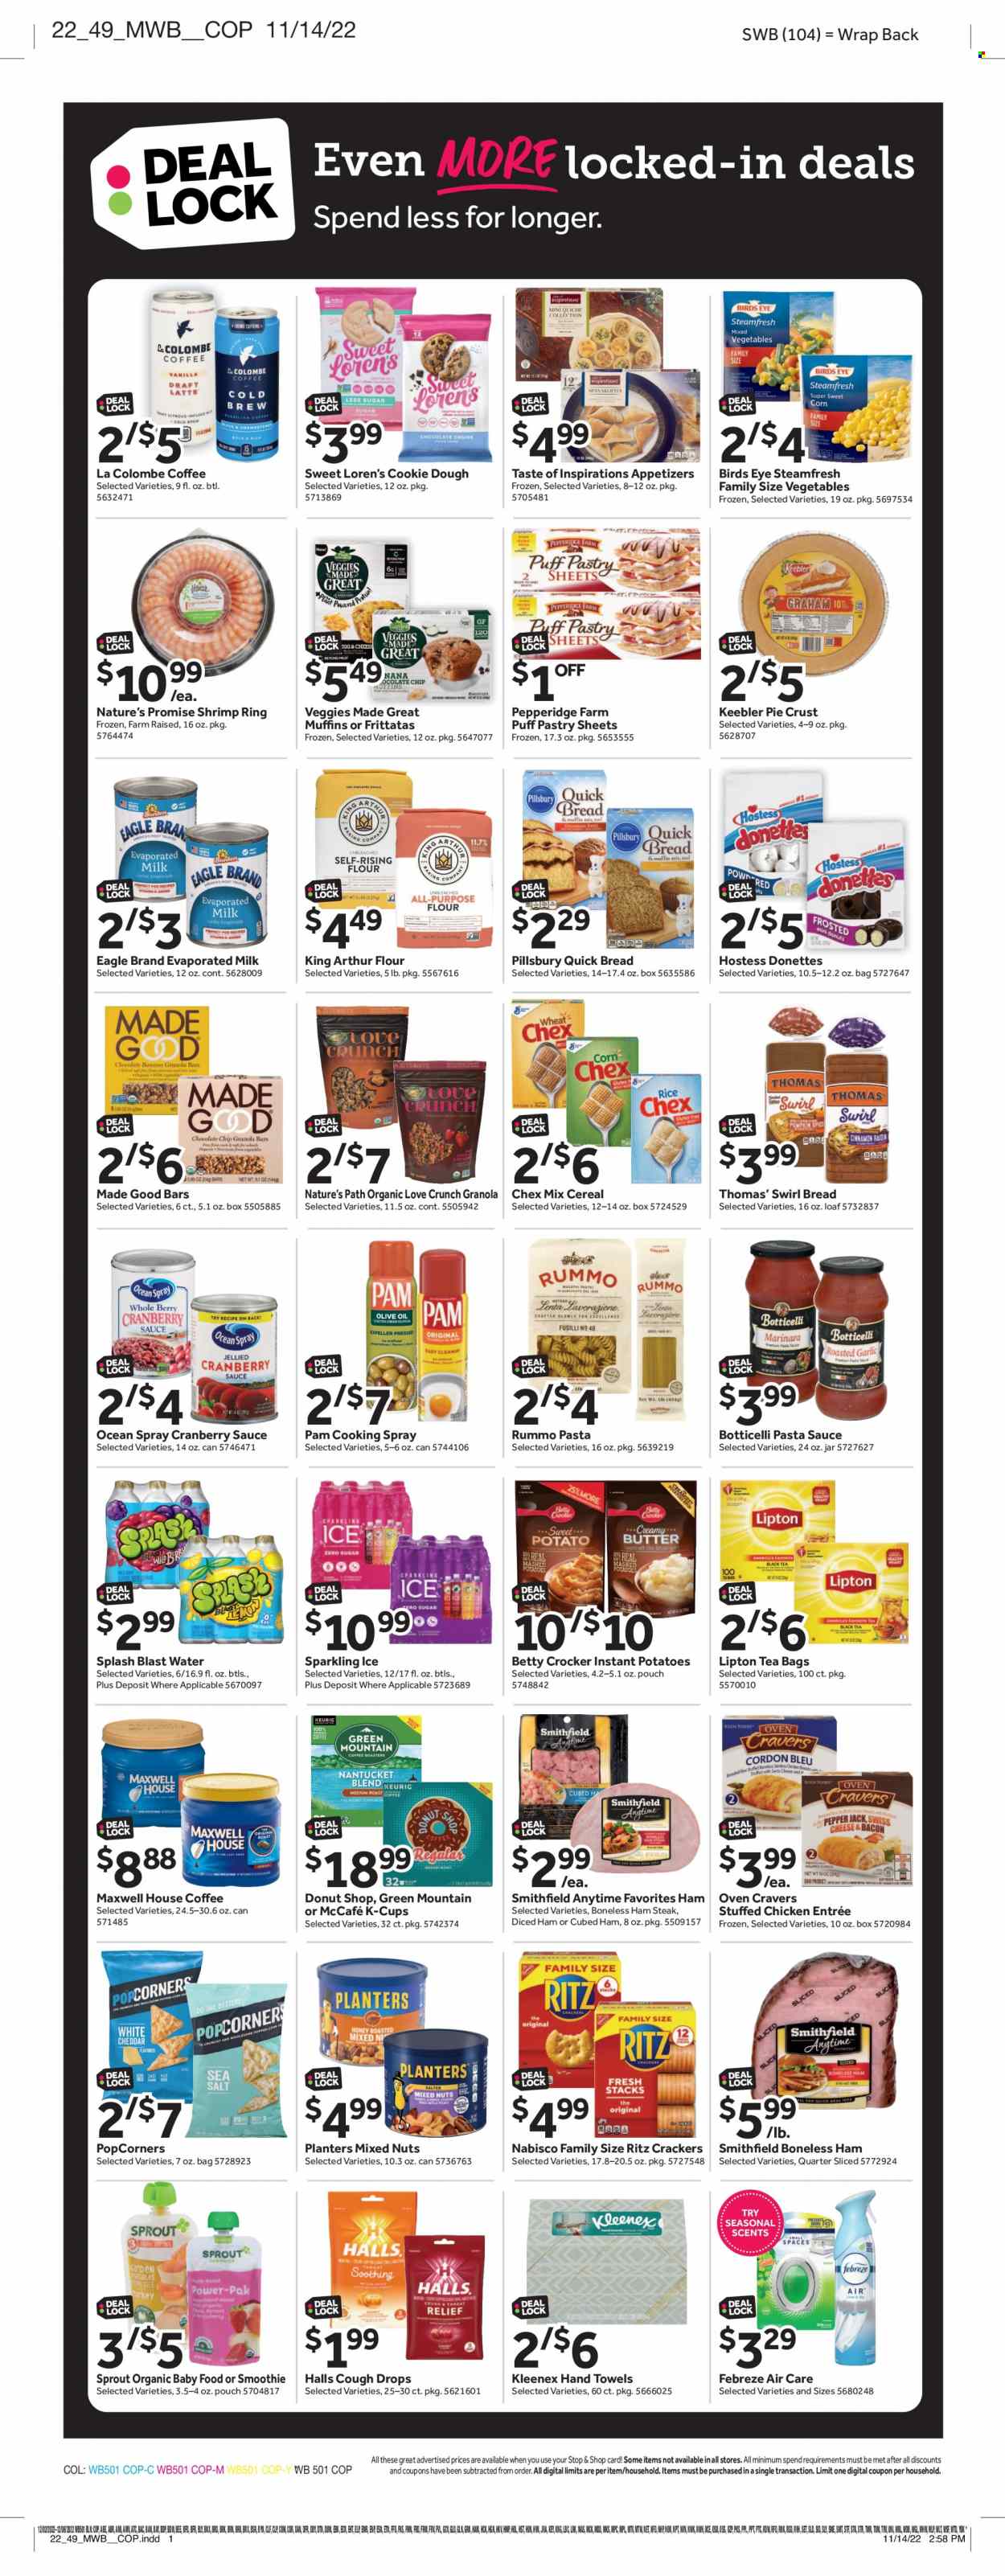 thumbnail - Stop & Shop Flyer - 12/02/2022 - 12/08/2022 - Sales products - bread, Nature’s Promise, muffin, corn, potatoes, steak, shrimps, pasta sauce, sauce, Pillsbury, Bird's Eye, stuffed chicken, bacon, ham, cheddar, cheese, evaporated milk, butter, puff pastry, cordon bleu, cookie dough, Halls, crackers, Keebler, RITZ, popcorn, Chex Mix, flour, pie crust, malt, cereals, granola, rice, cooking spray, olive oil, oil, cranberry sauce, honey, mixed nuts, Planters, Lipton, smoothie, Maxwell House, tea bags, coffee, coffee capsules, McCafe, K-Cups, Green Mountain, organic baby food, Kleenex, Febreze, Nana, cough drops. Page 8.